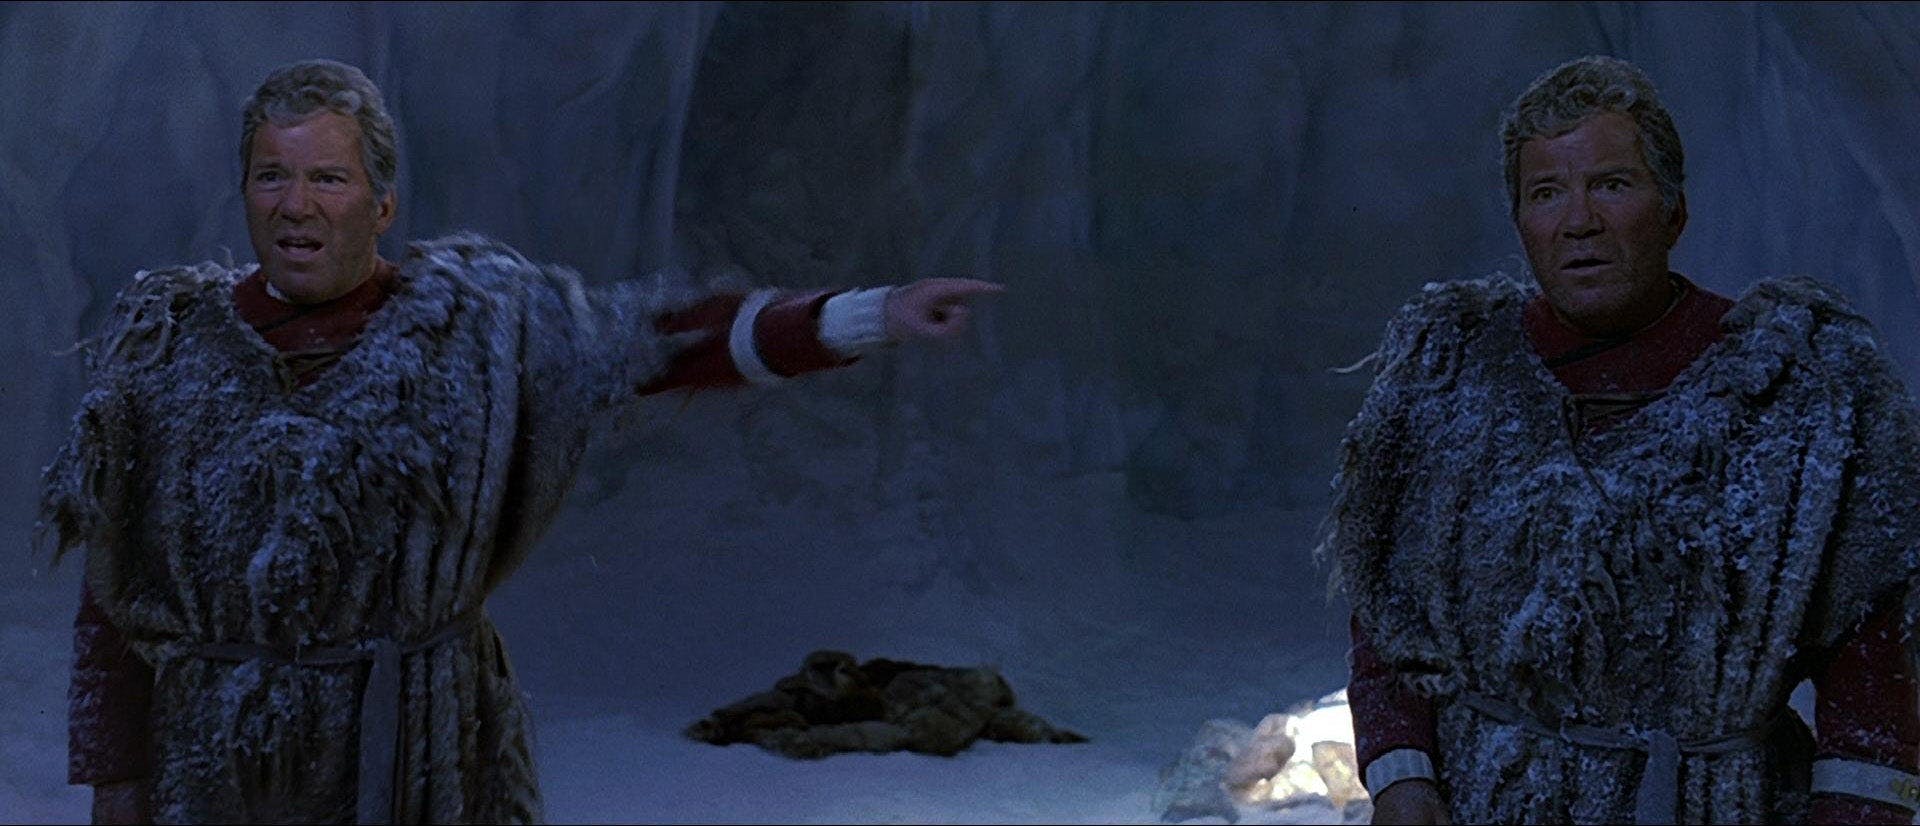 Two versions of James T. Kirk stand opposite each other. The Kirk on the left is pointing at the Kirk on the right. Both are wearing snowy clothes and are standing on an icy planet.